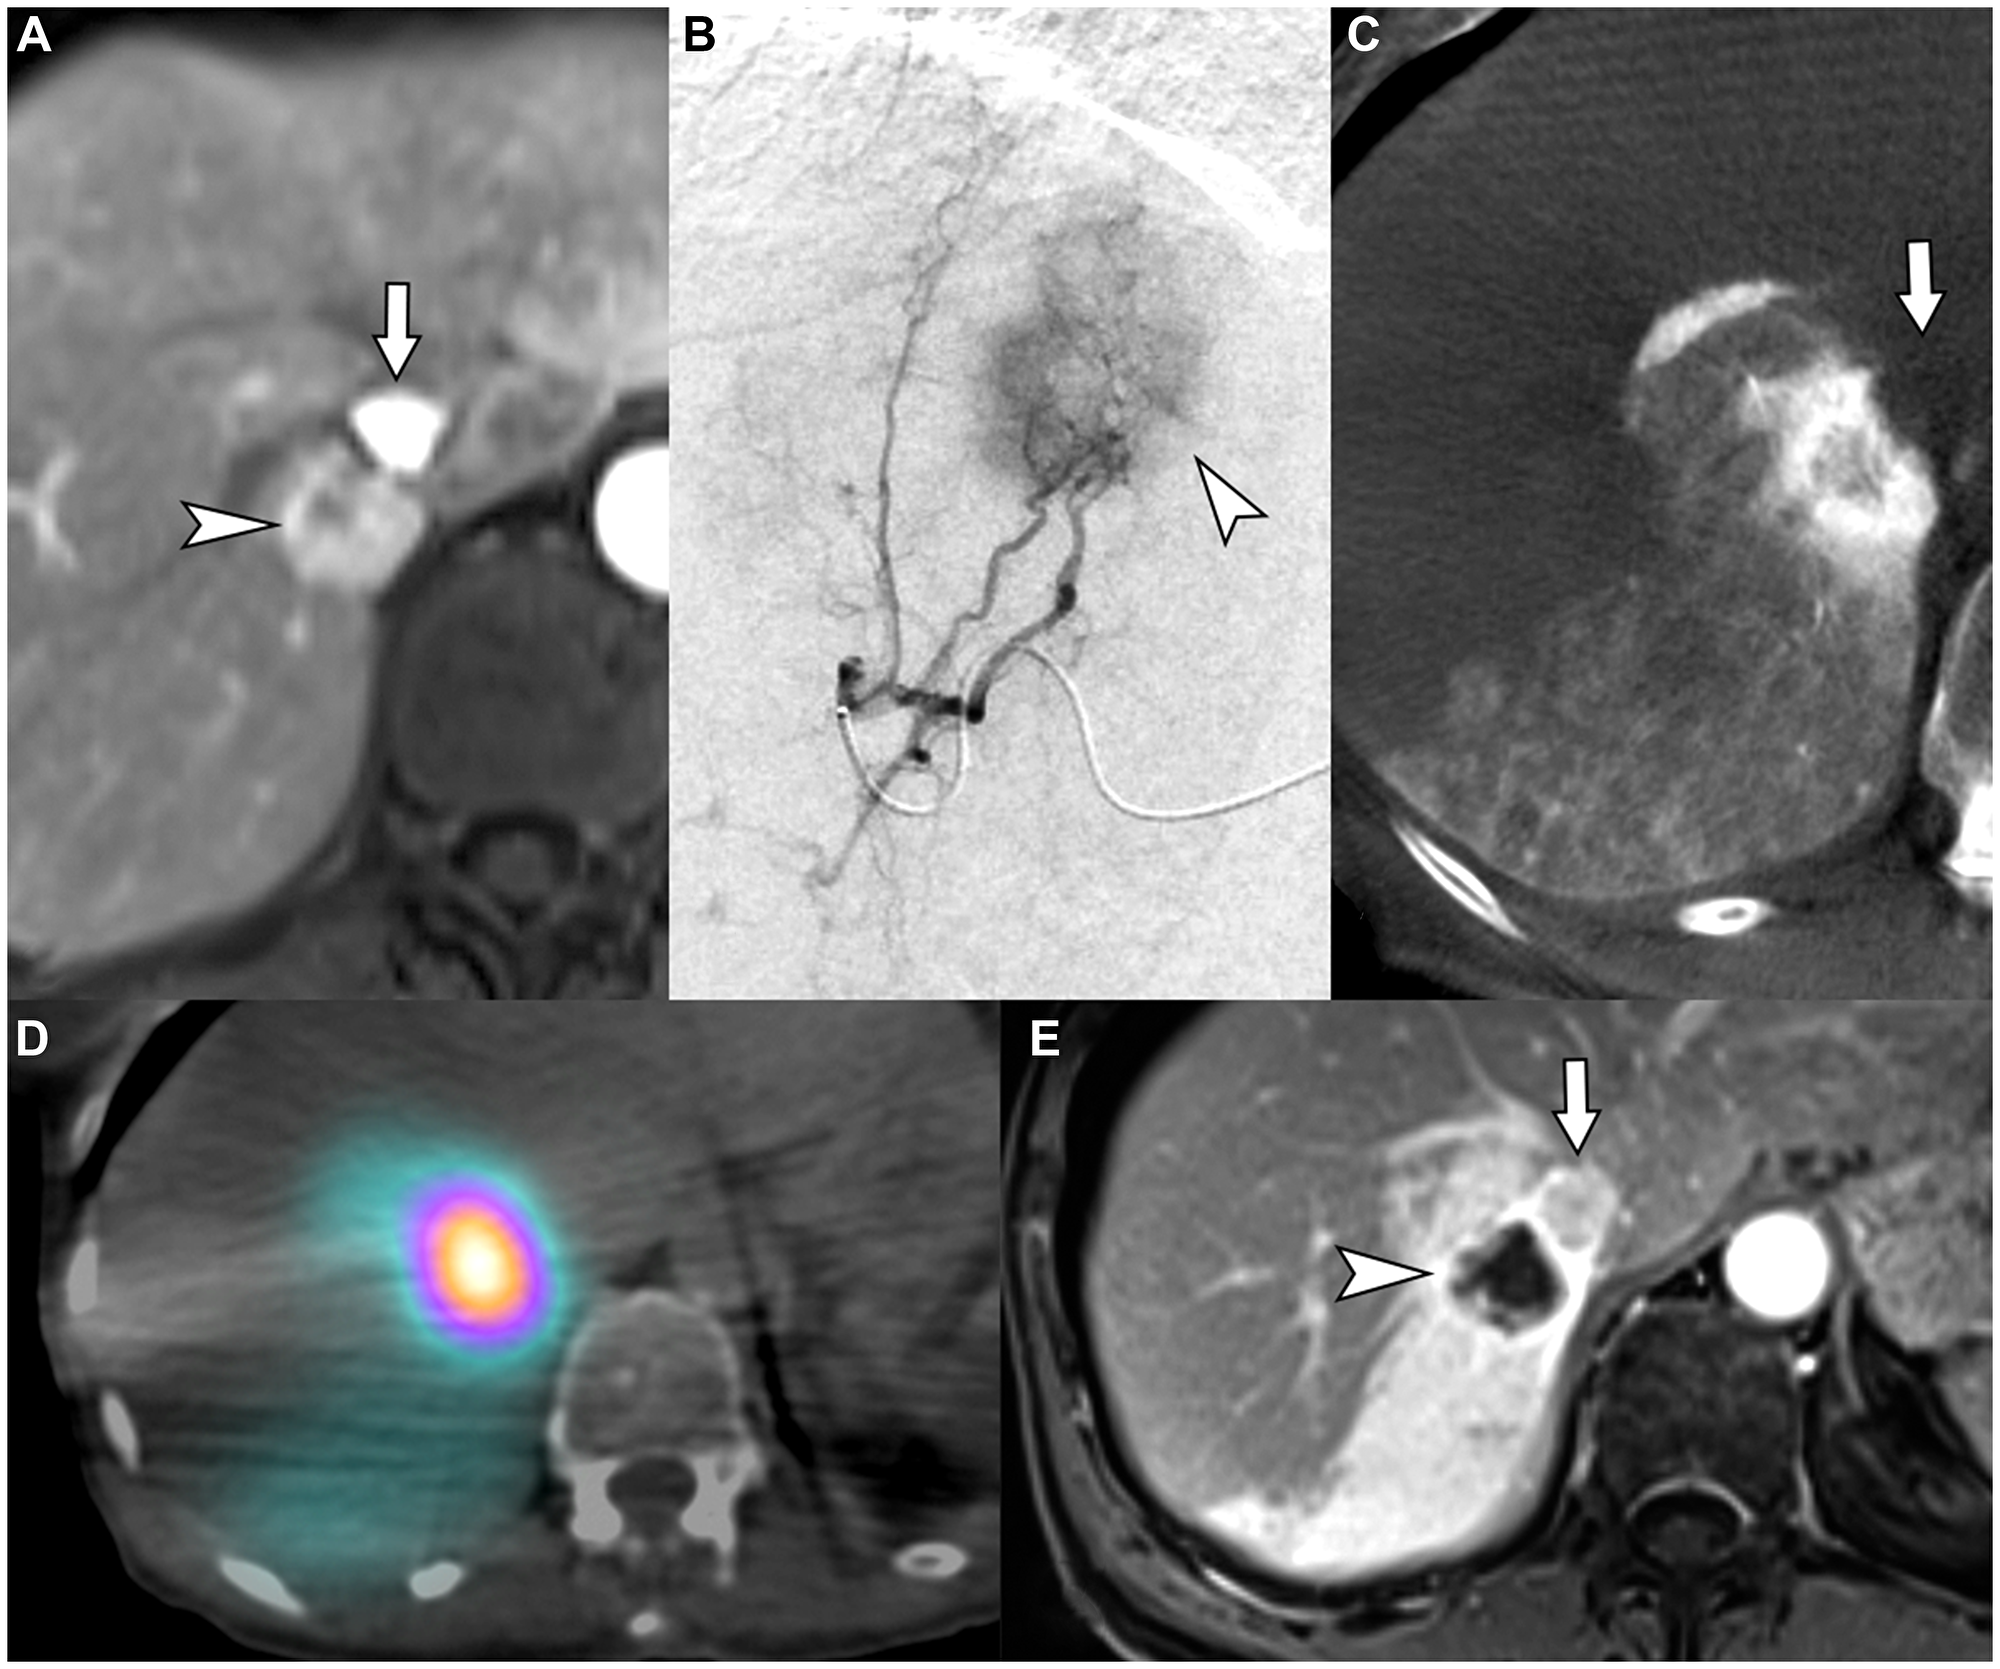 62-year-old female with intrahepatic cholangiocarcinoma in need for liver therapy as a bridge to hepatic resection while being treated for an unrelated second primary adenocarcinoma of lung.